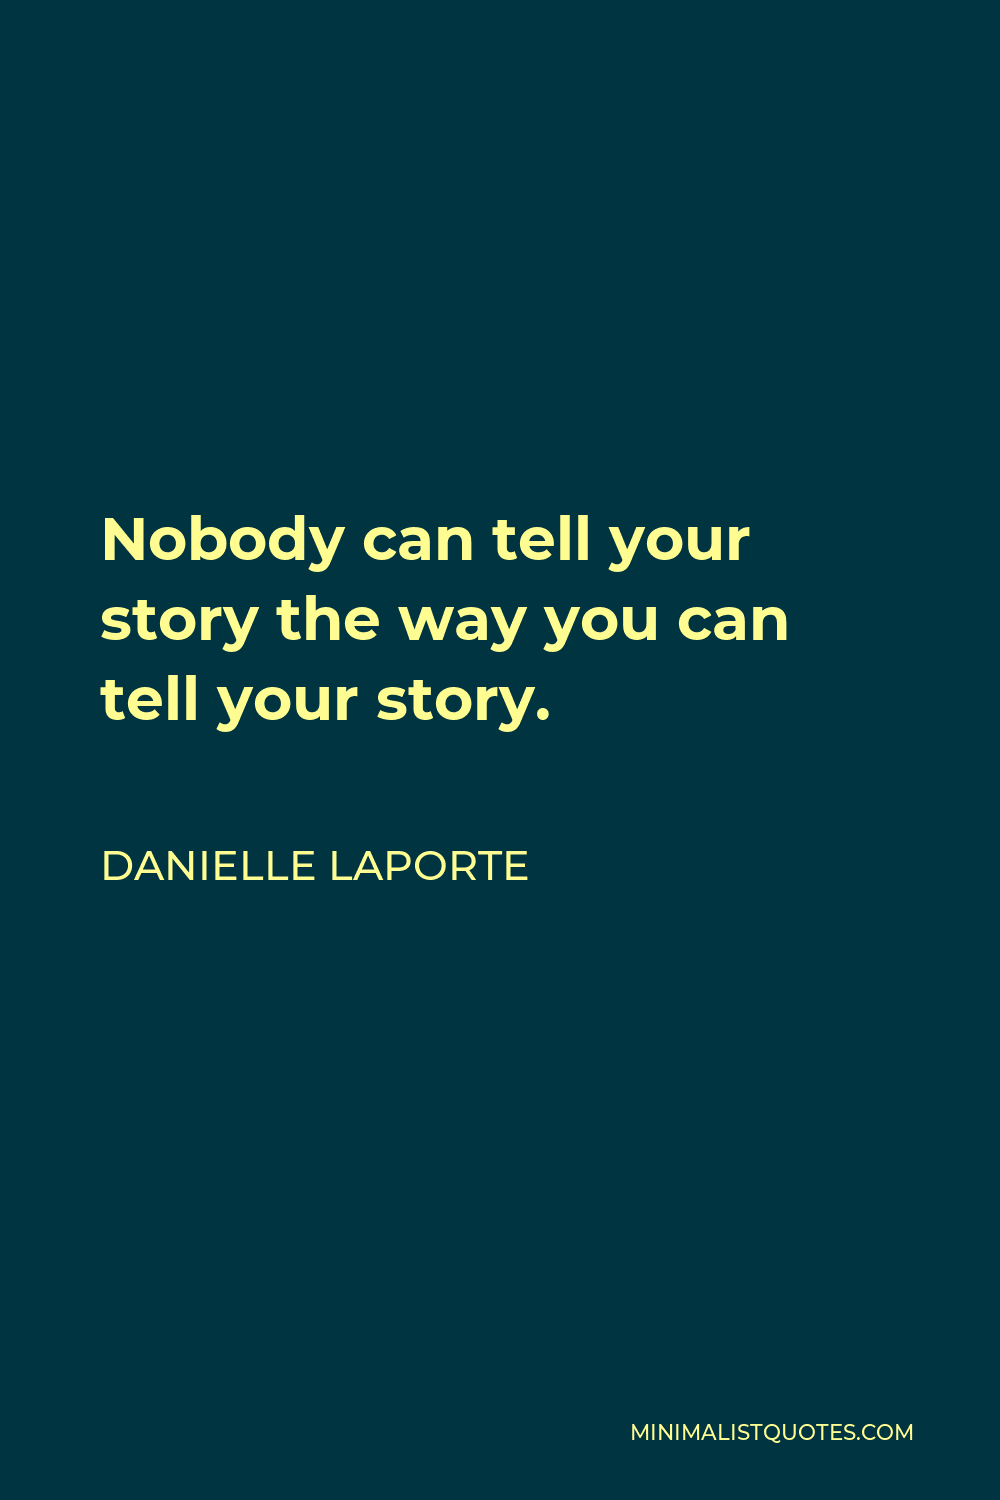 Danielle LaPorte Quote - Nobody can tell your story the way you can tell your story.